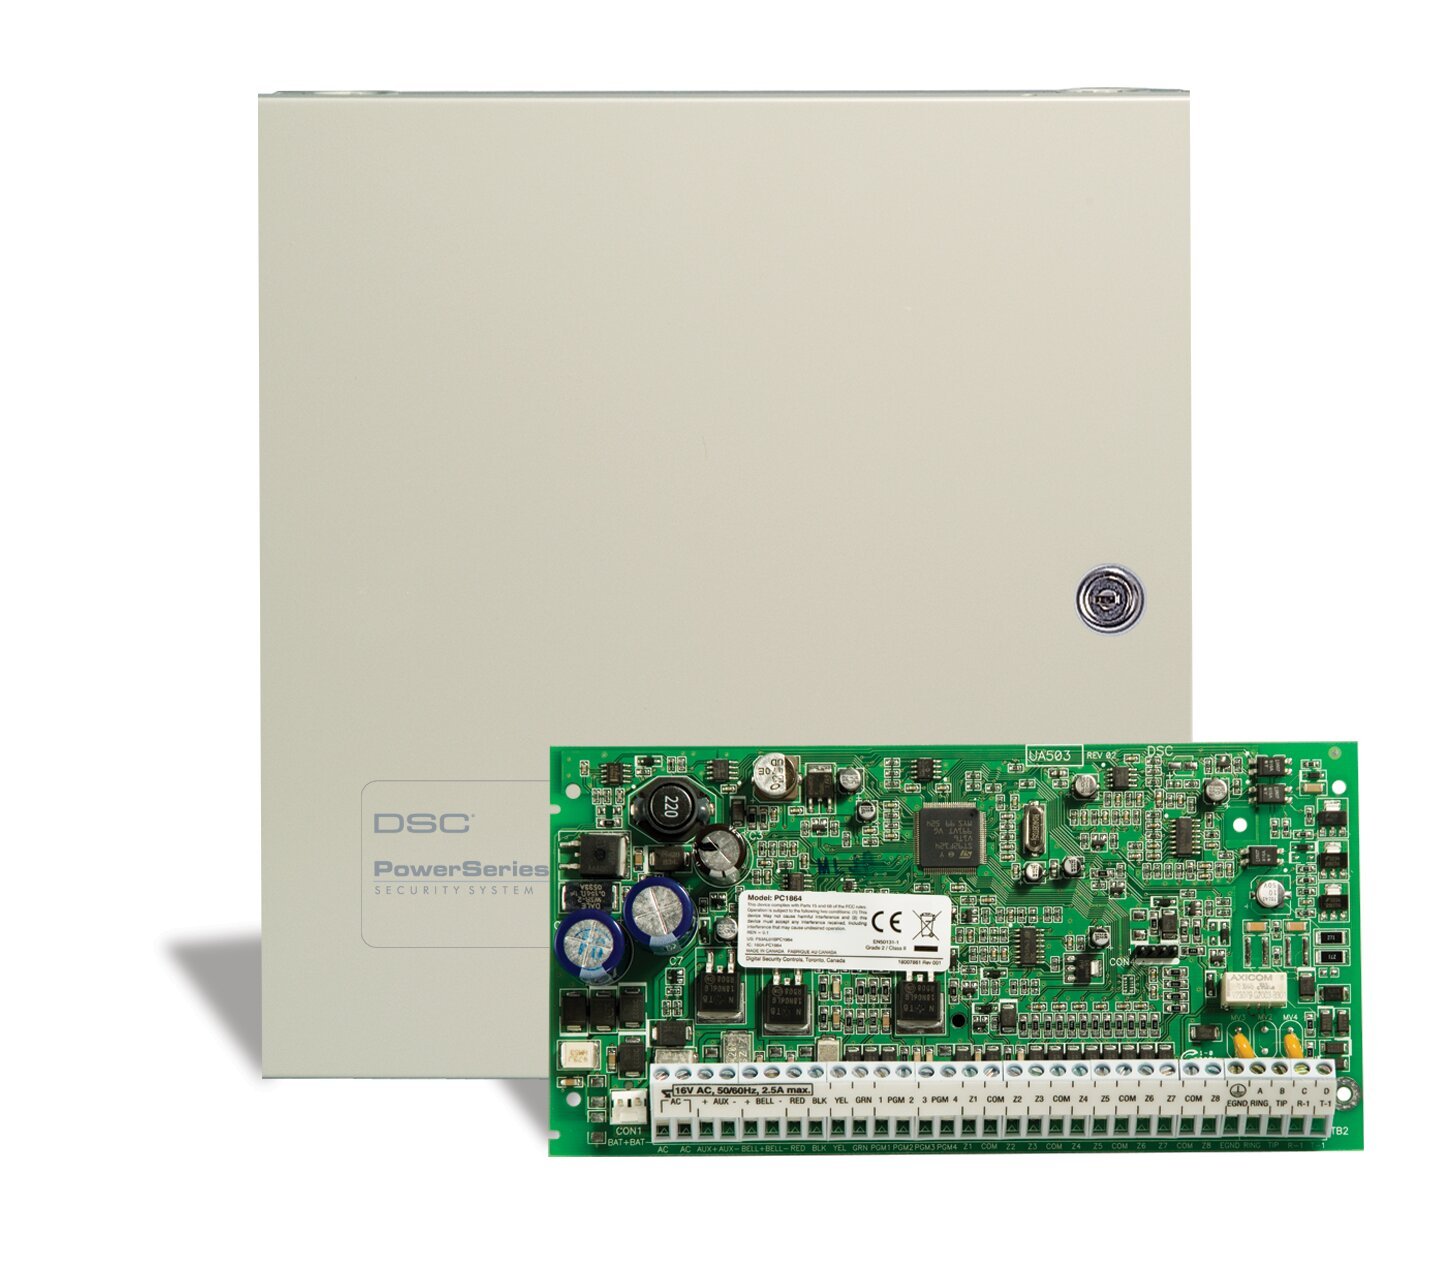 DSC PC1864 Basic Kit with 2x DSCLC-100 PIR and NO Keypad * Kit contains the following items: * 1x DSSCPC1864PCBAUS - PCB 8-Zone Onboard PCB Panel * 1x DSCPC5003C - Large Cabinet * 2x DSCLC-100-PI - PIR Motion Detector with Pet Immunity * 1x DSCT-1 - Tampe